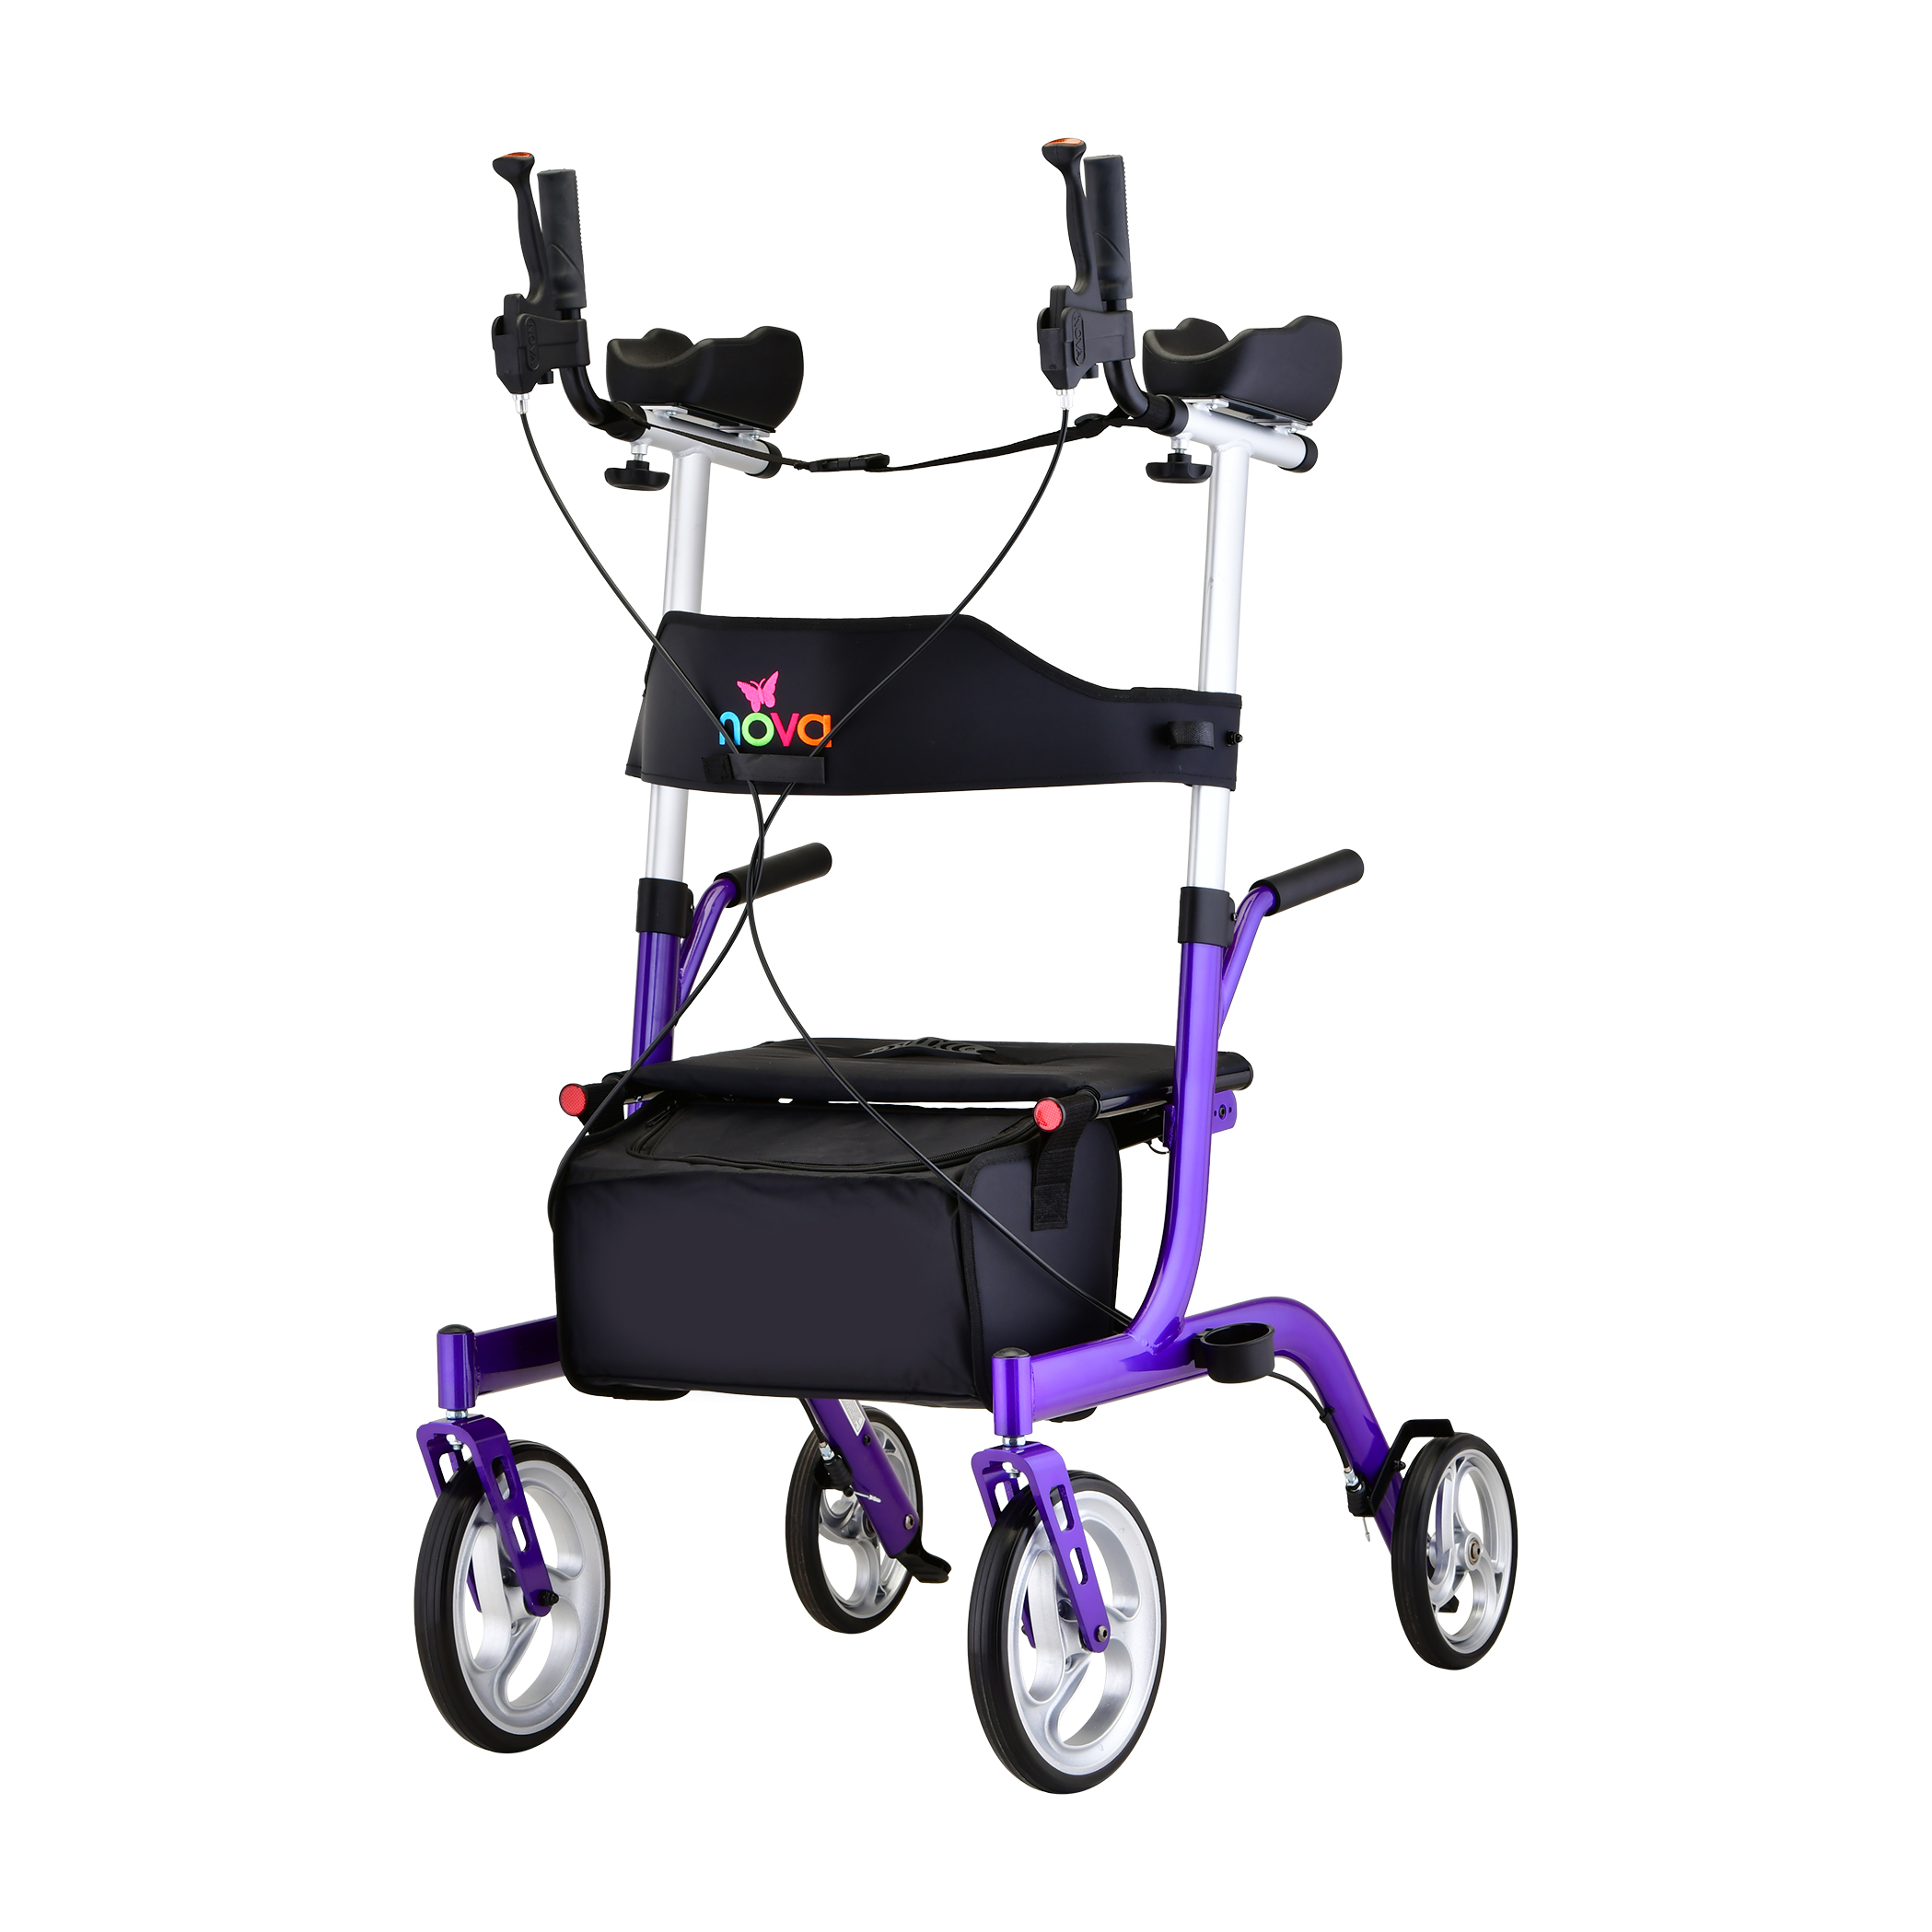 Latest rollator, as seen on TV, rollator with a seat